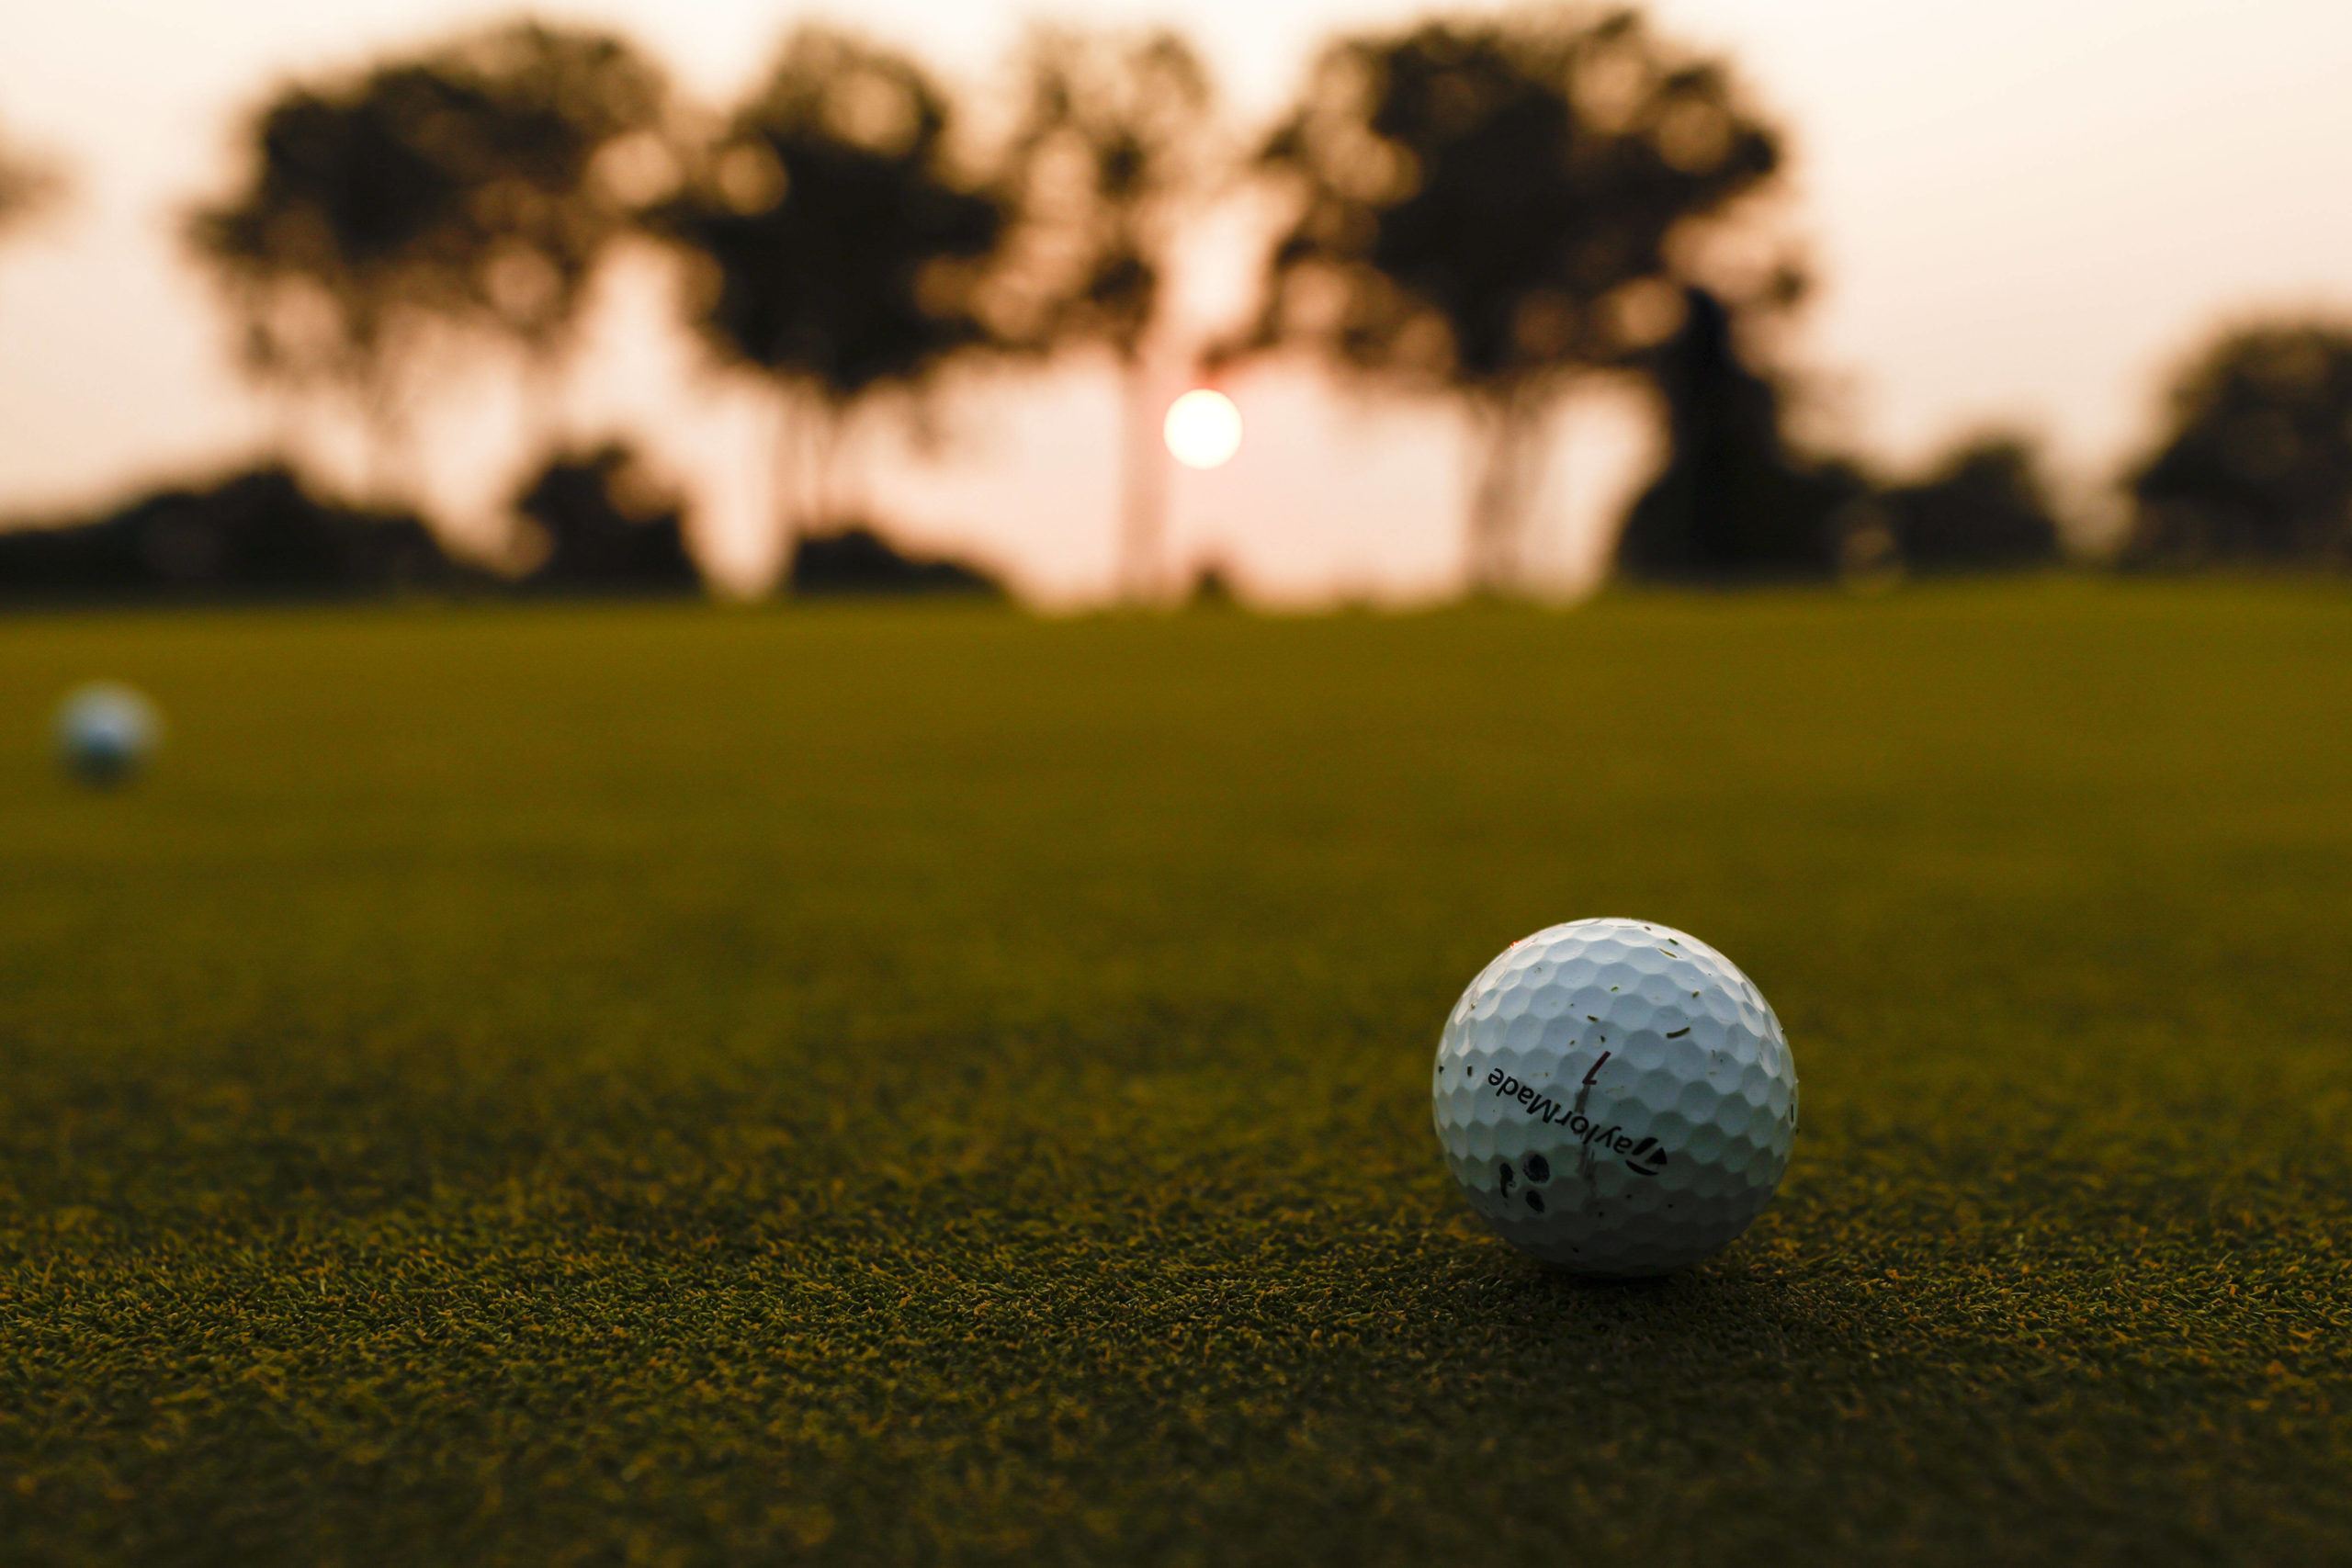 How to improve your course strategy while playing Golf